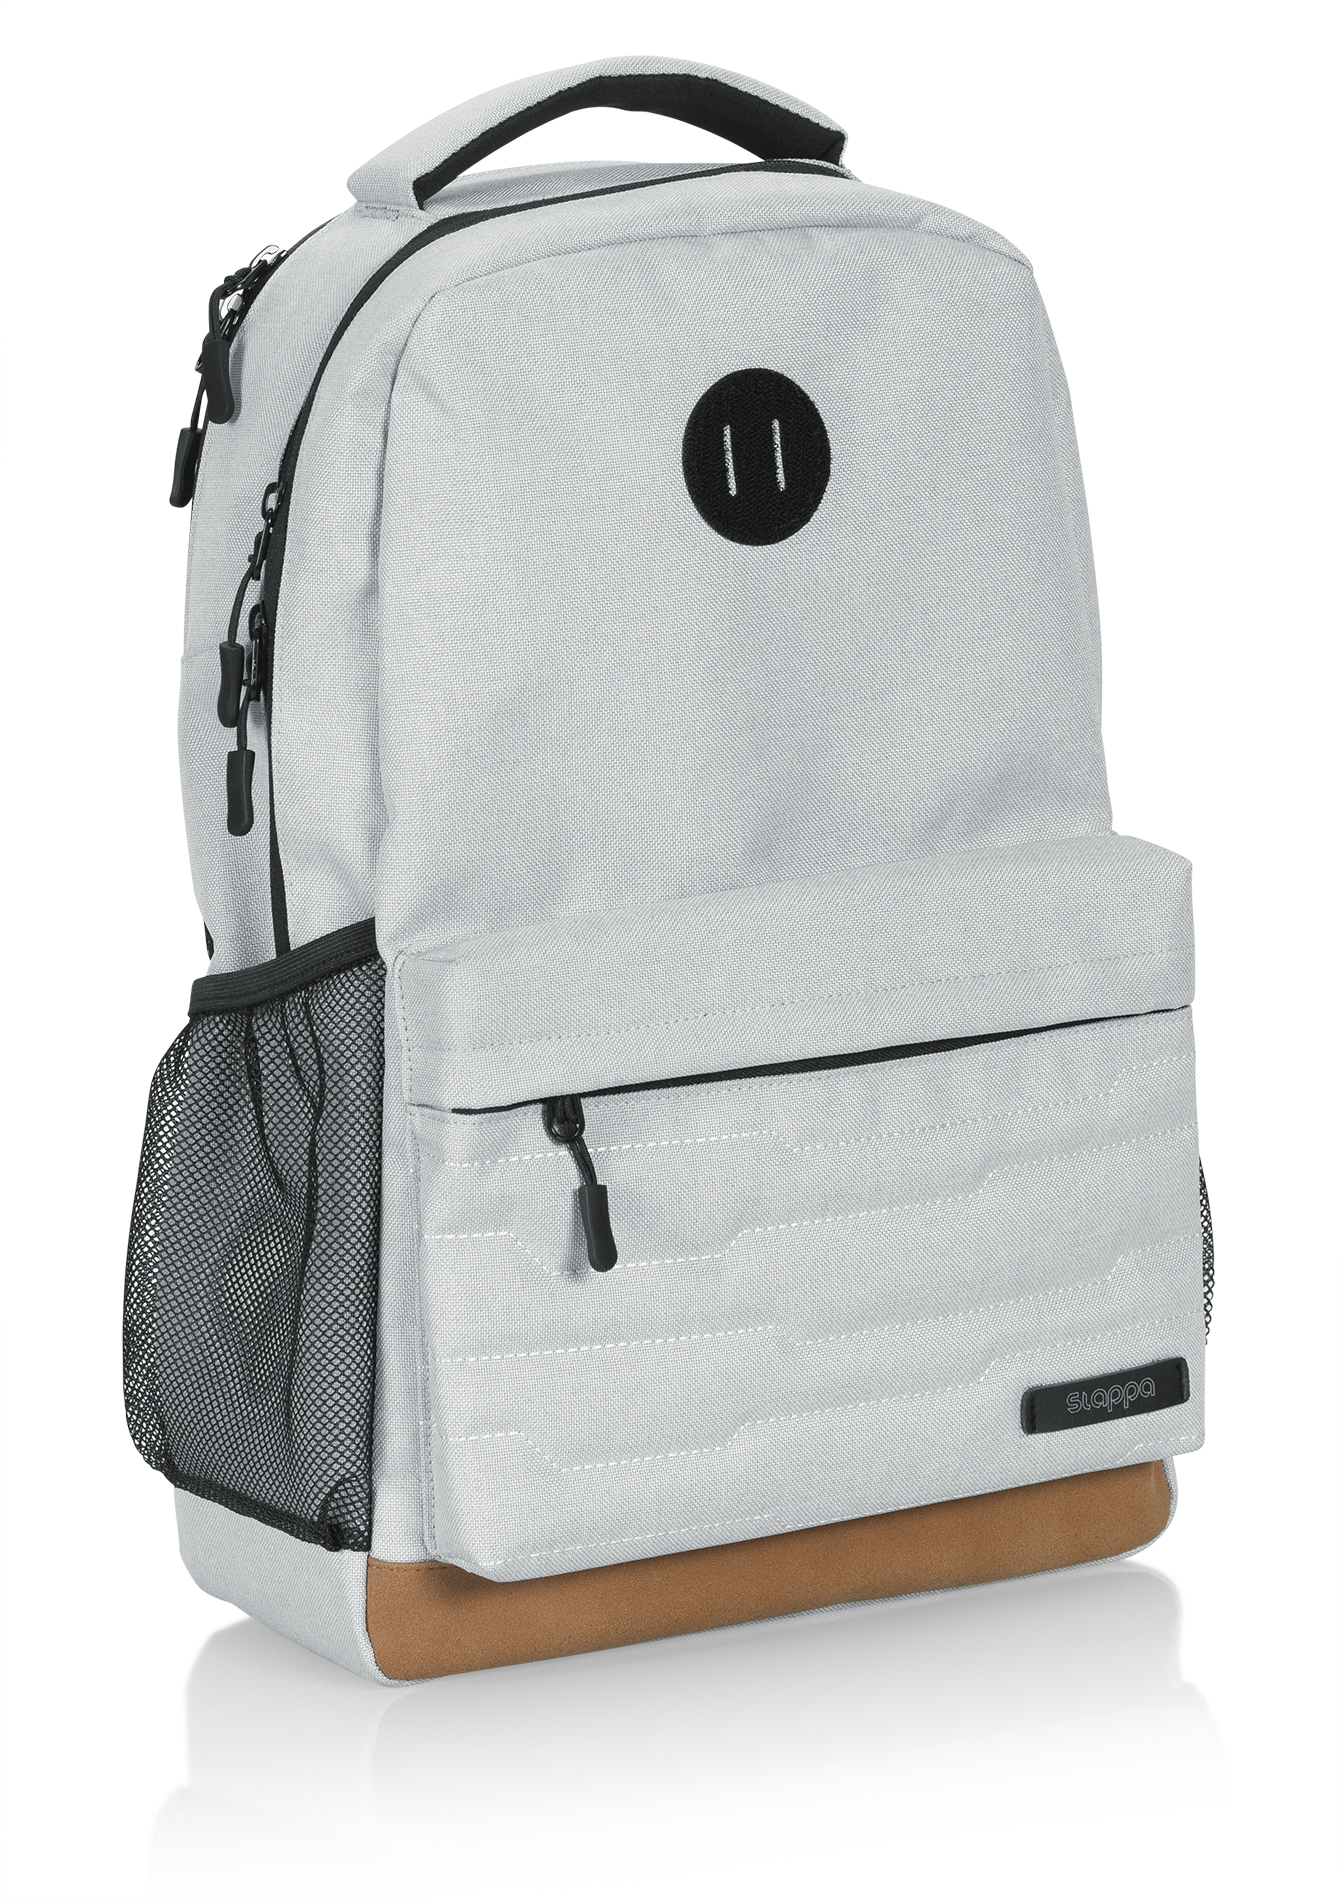 Gaming Laptop Backpack – Fits up to 15″ Laptops; White – Slappa